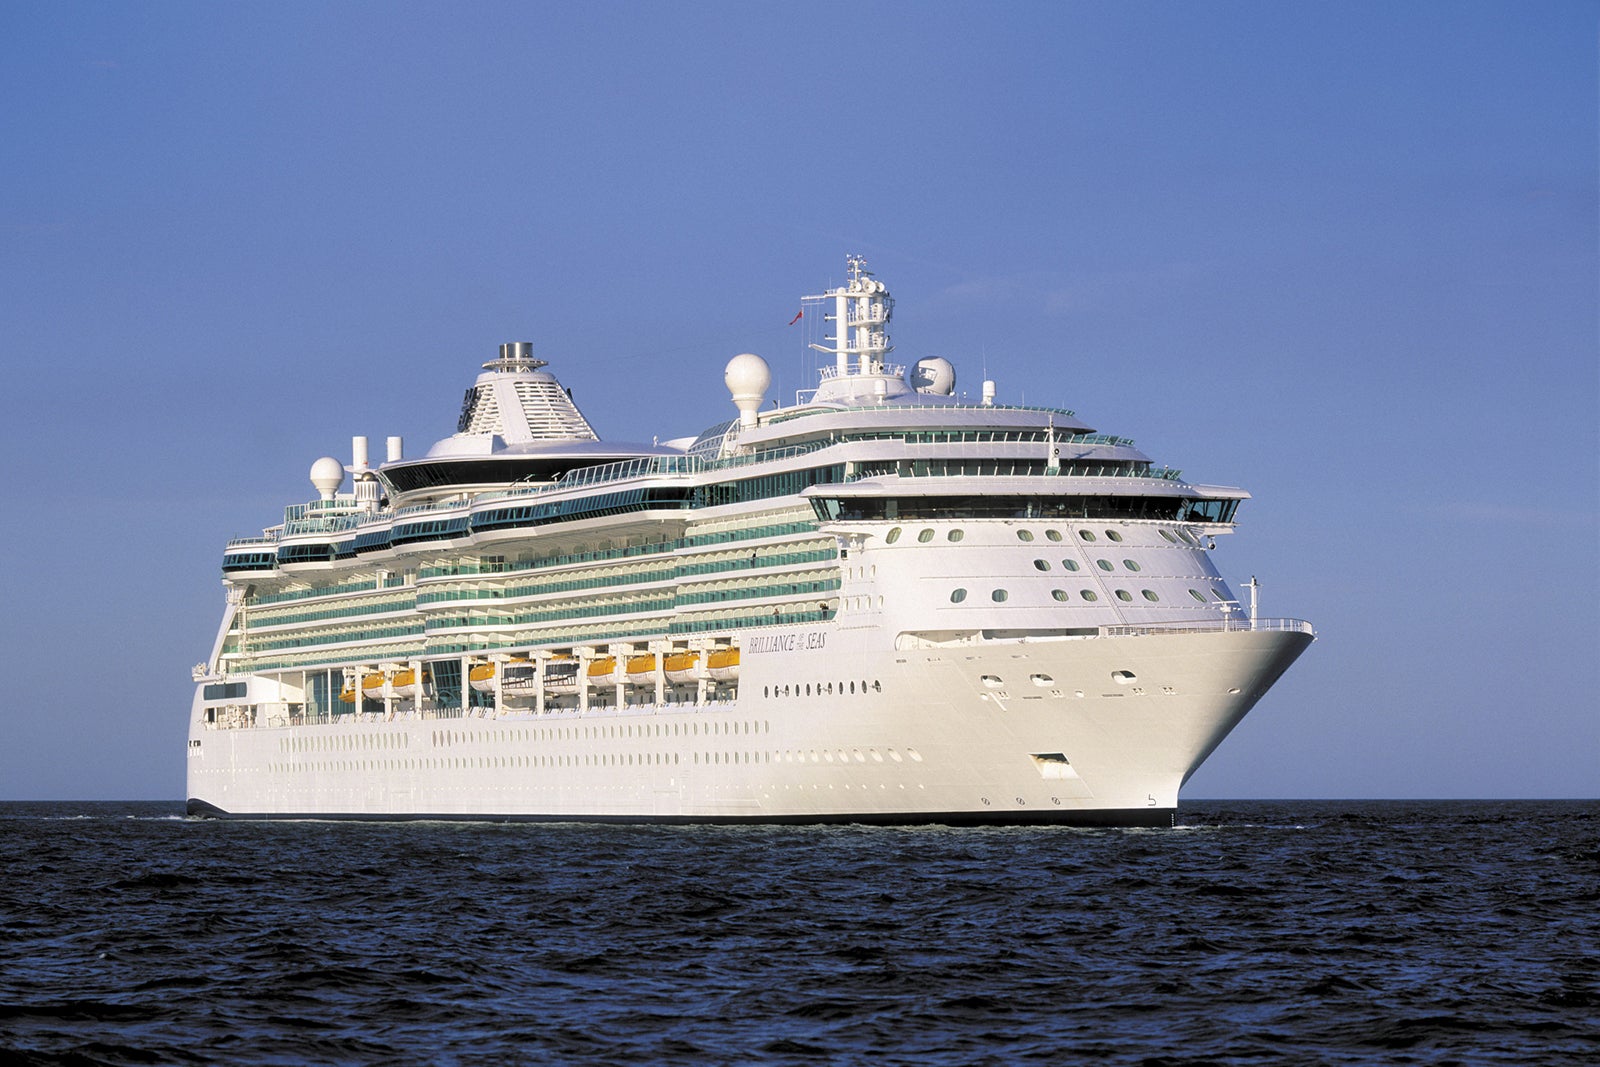 cruise ship built in 2009